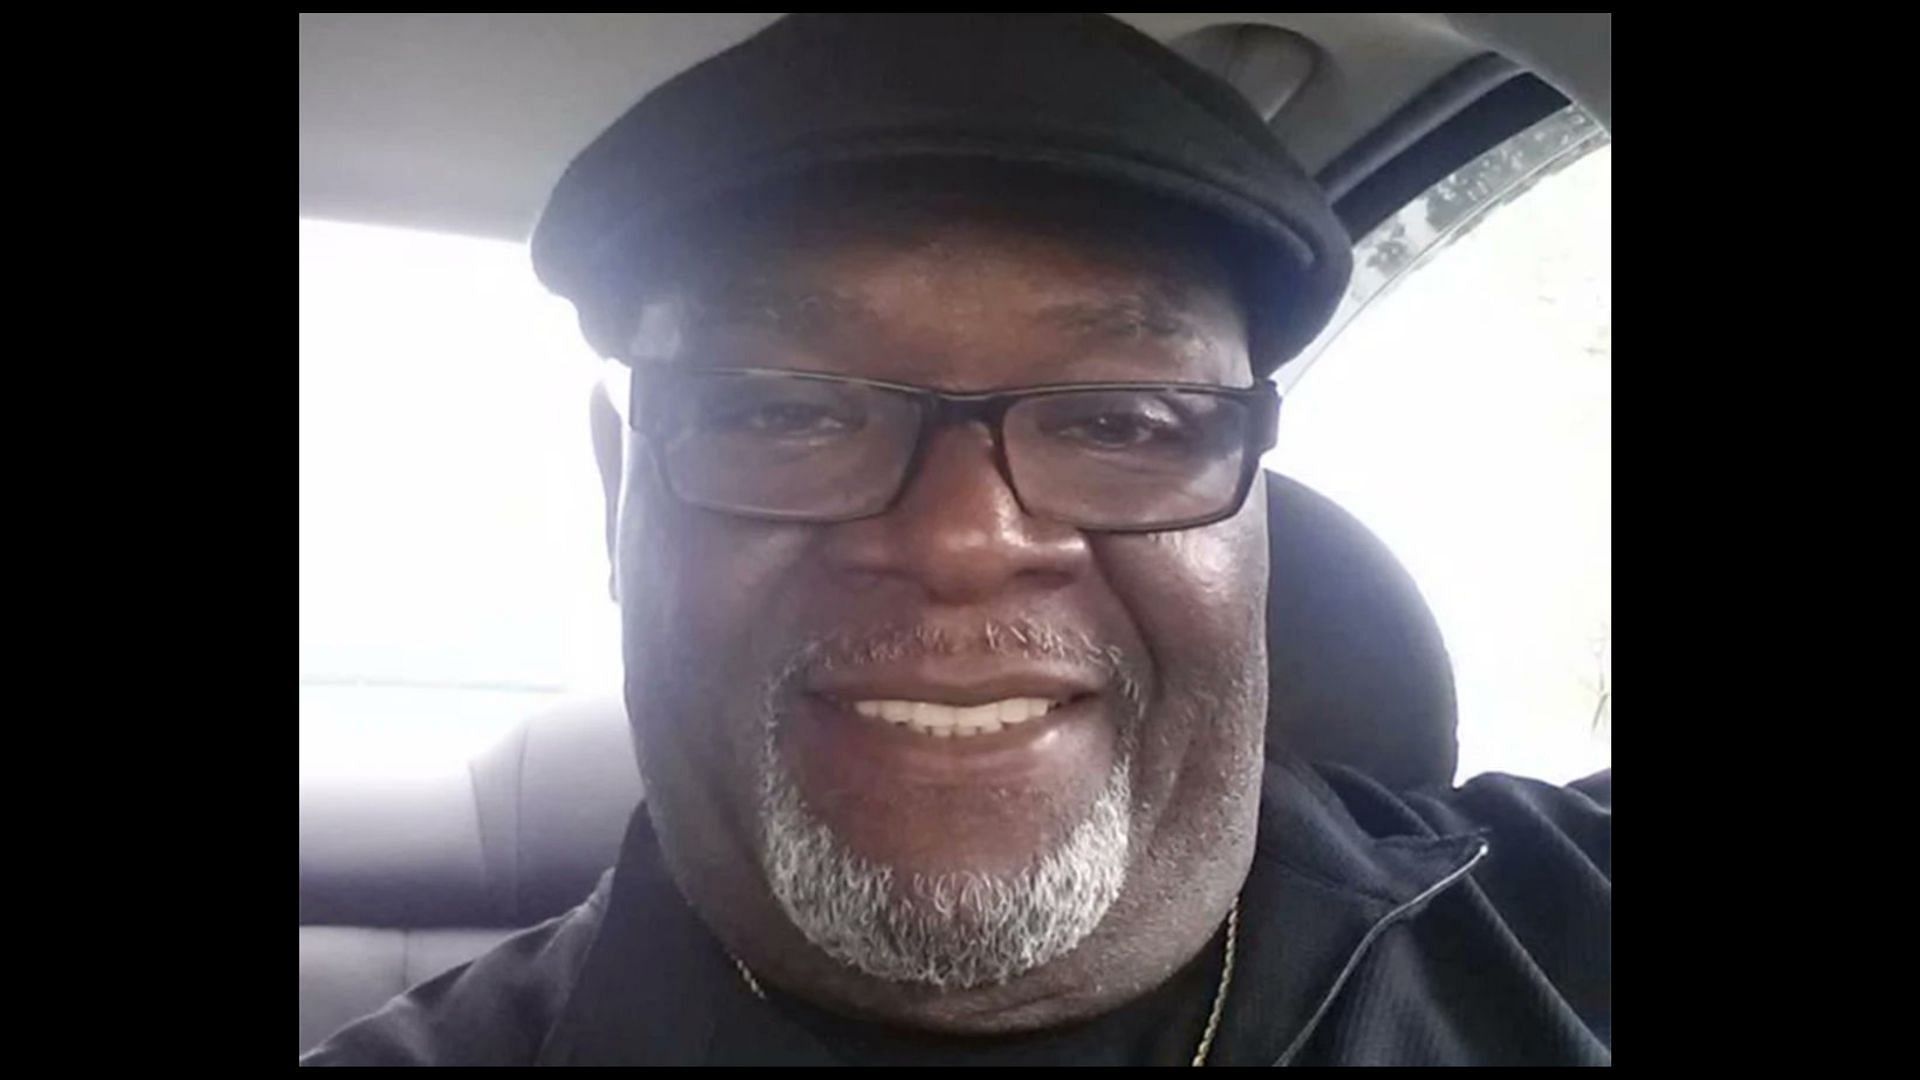 Mike Hill was one of the six victims killed in the shootout in the Nashville school, (Image via Flierinbluefields333/Twitter)